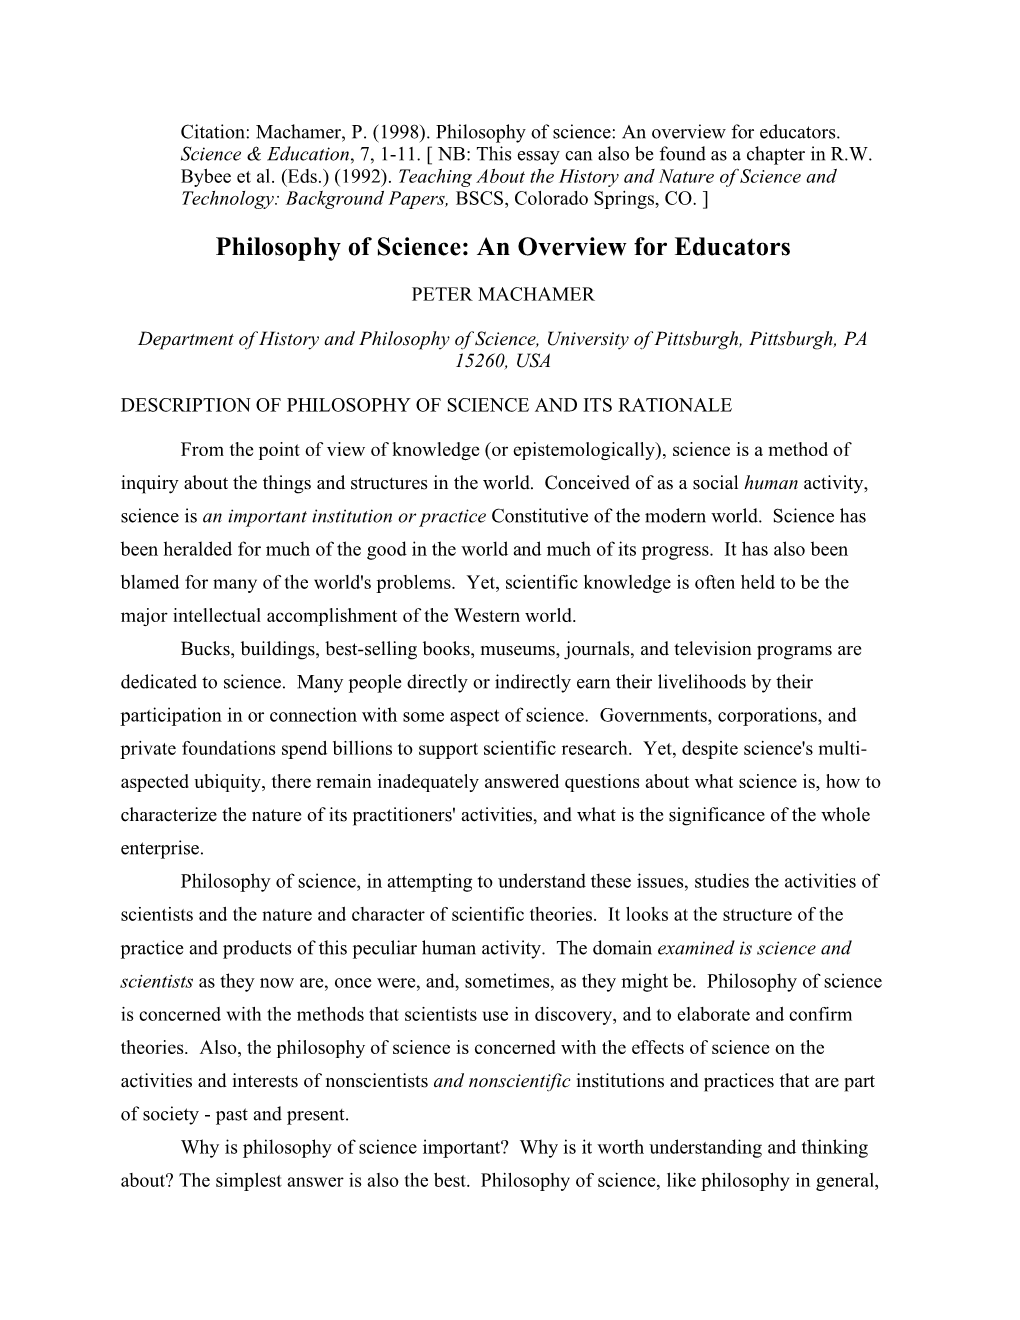 Philosophy of Science: an Overview for Educators